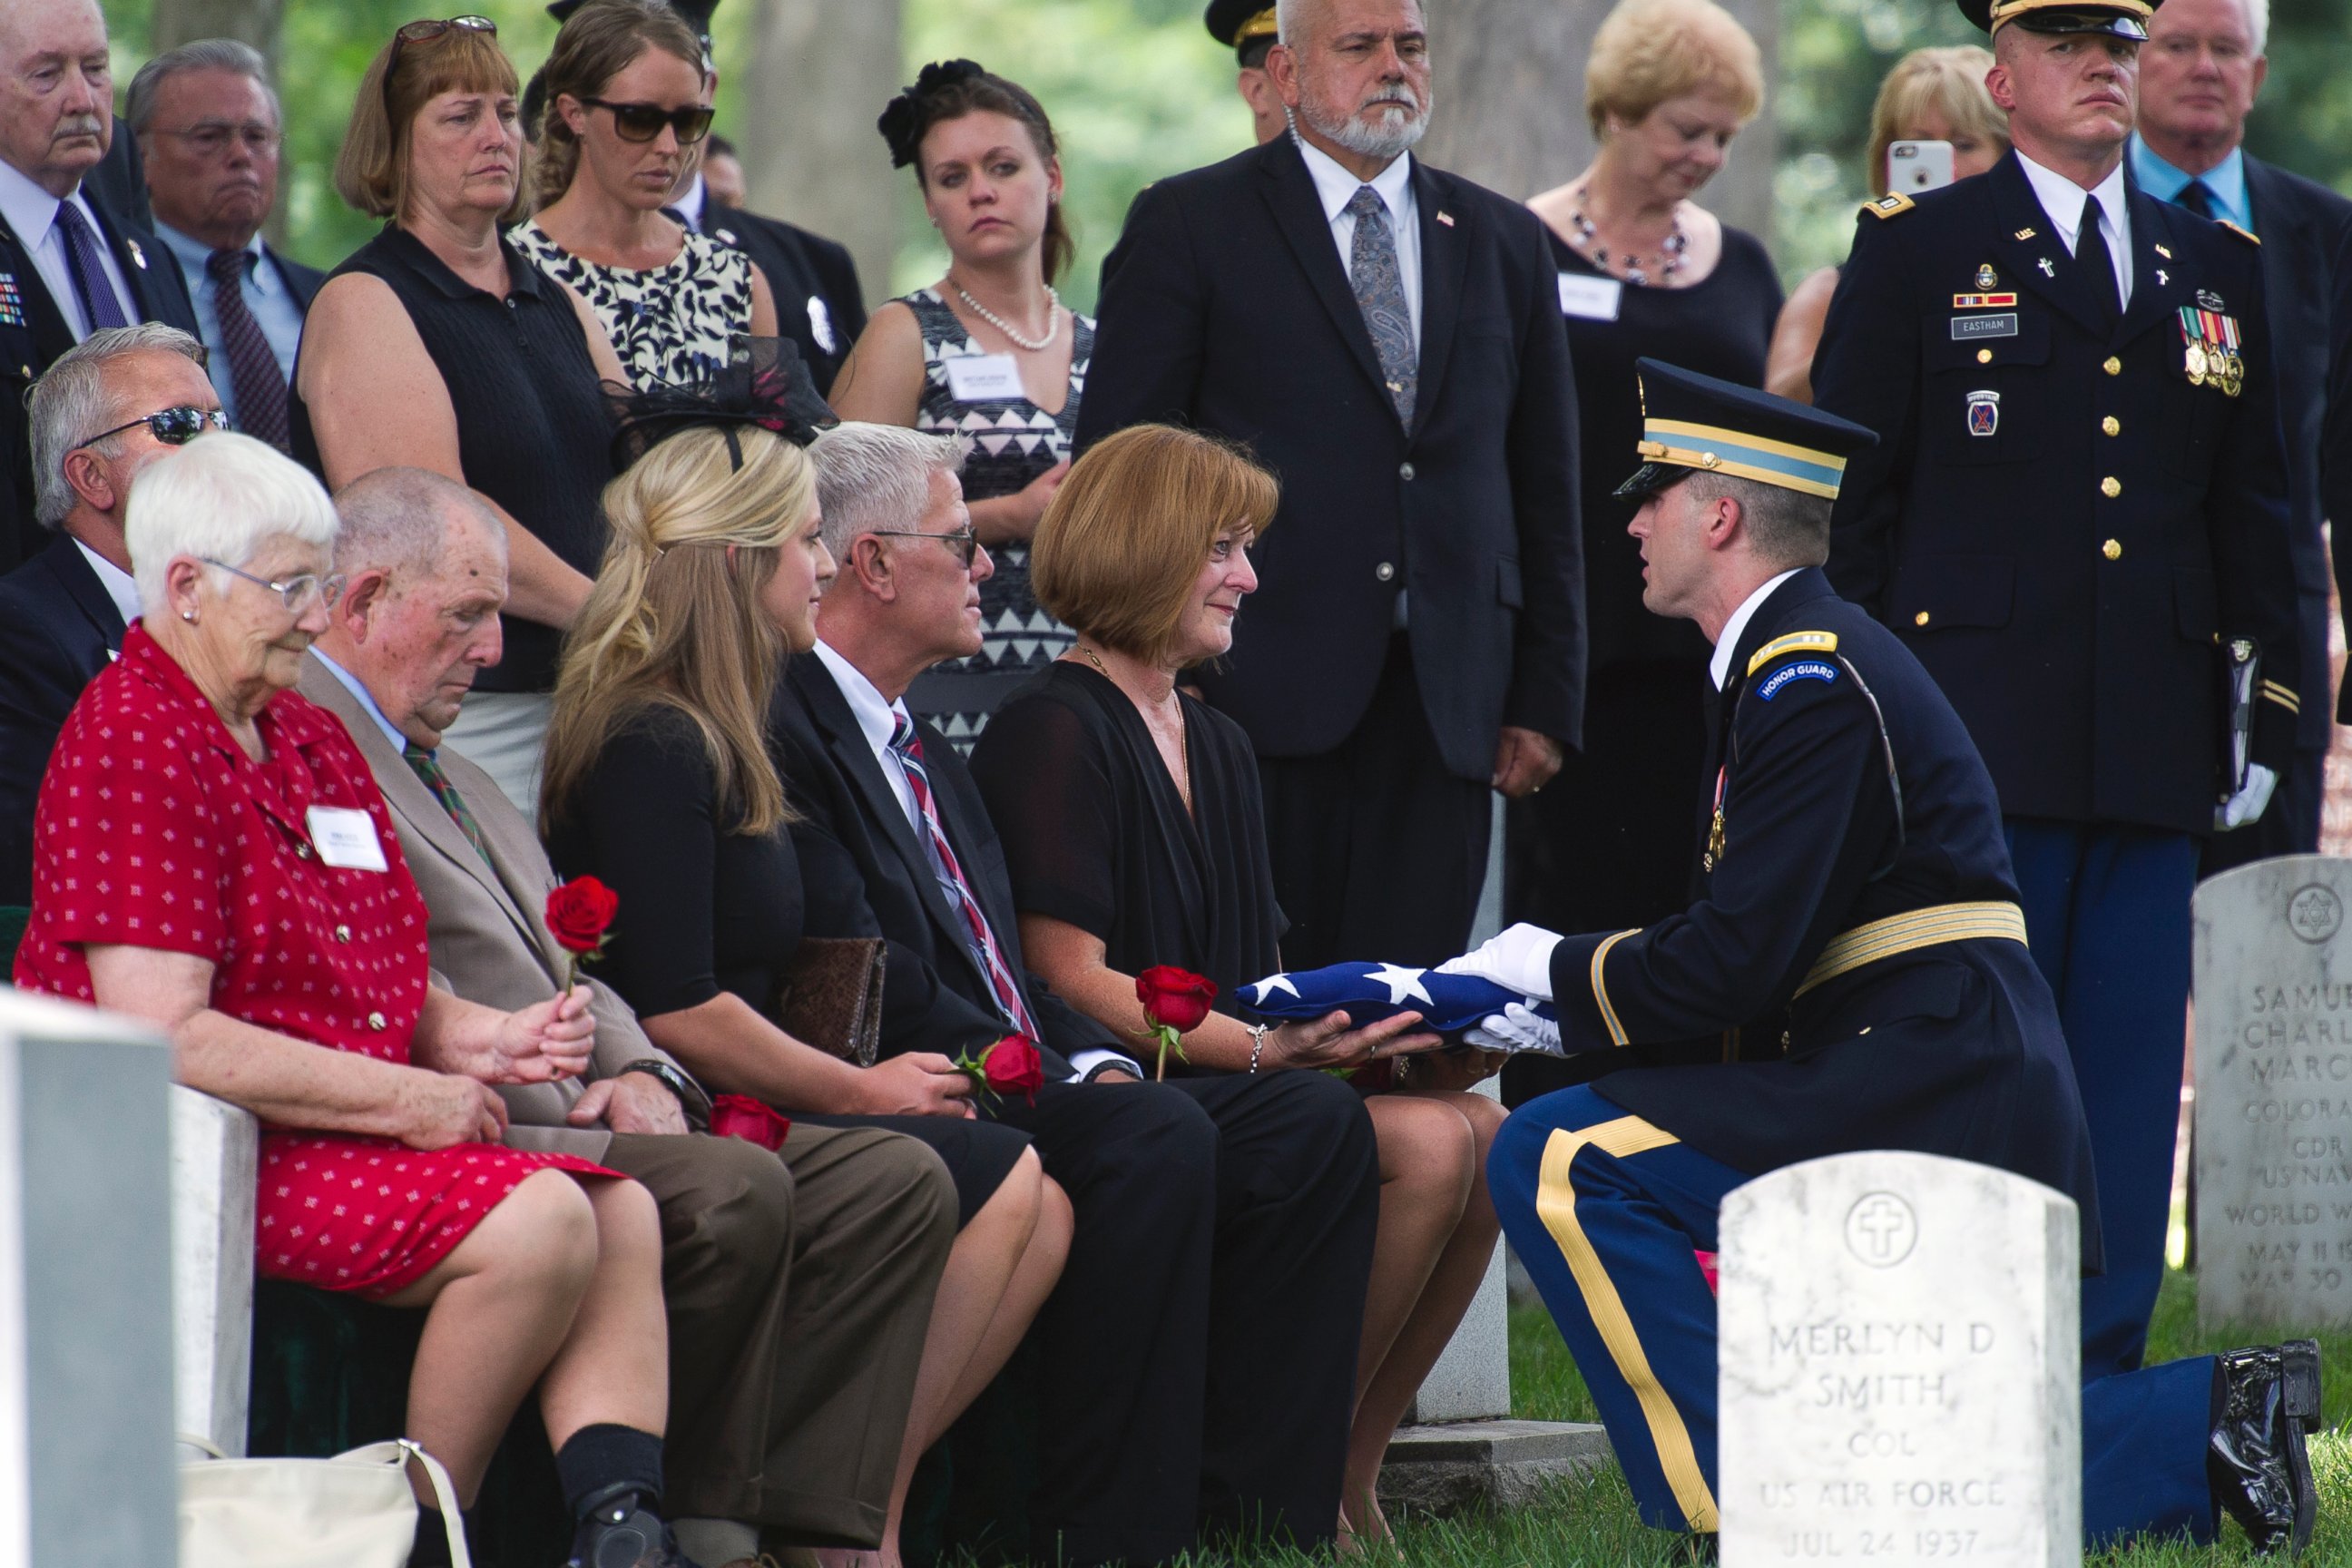 PHOTO: Army Capt. Carson Filipowski presents the flag which covered the casket of Army Air Forces 2nd Lt. John Herb of Cleveland, Ohio, to Peggy Herb, wife of his cousin Michael Herb, during his burial services at Section 30.